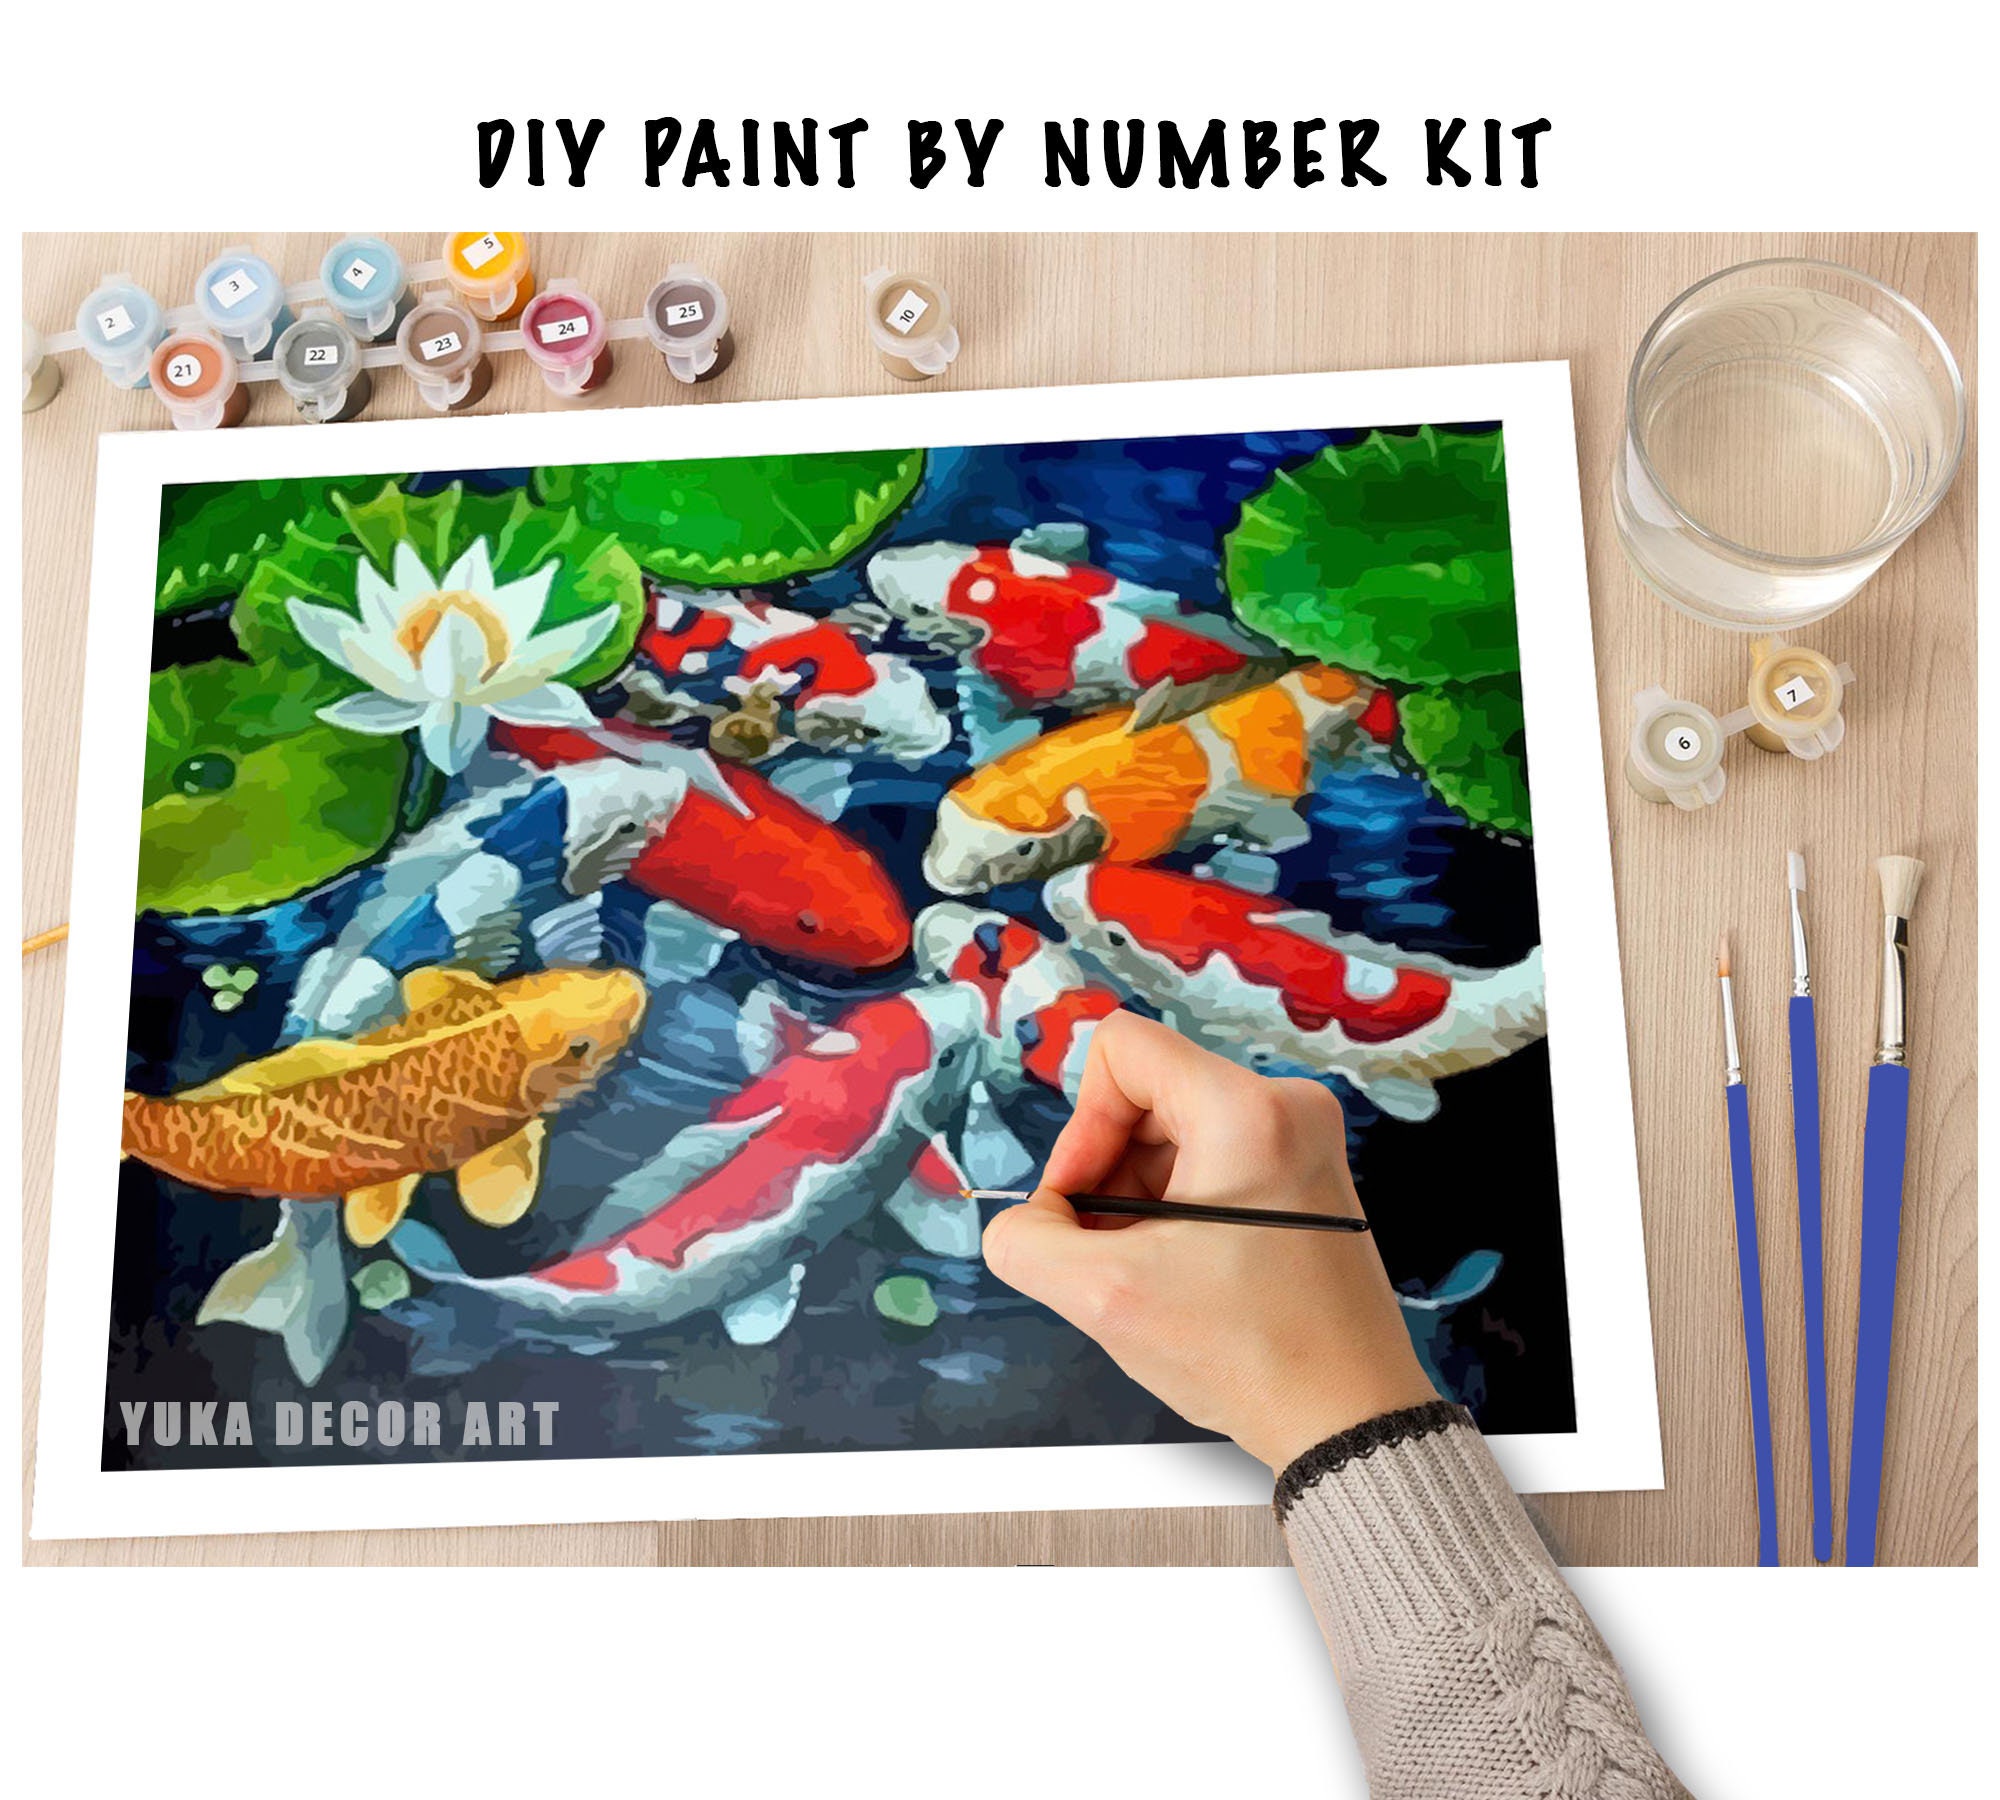 LikeyFactory Paint by Numbers Kit for Adults on Canvas with Paintbrushes  Color Acrylic DIY Drawing Premium Quality Colorwork Paintwork Corn Plant